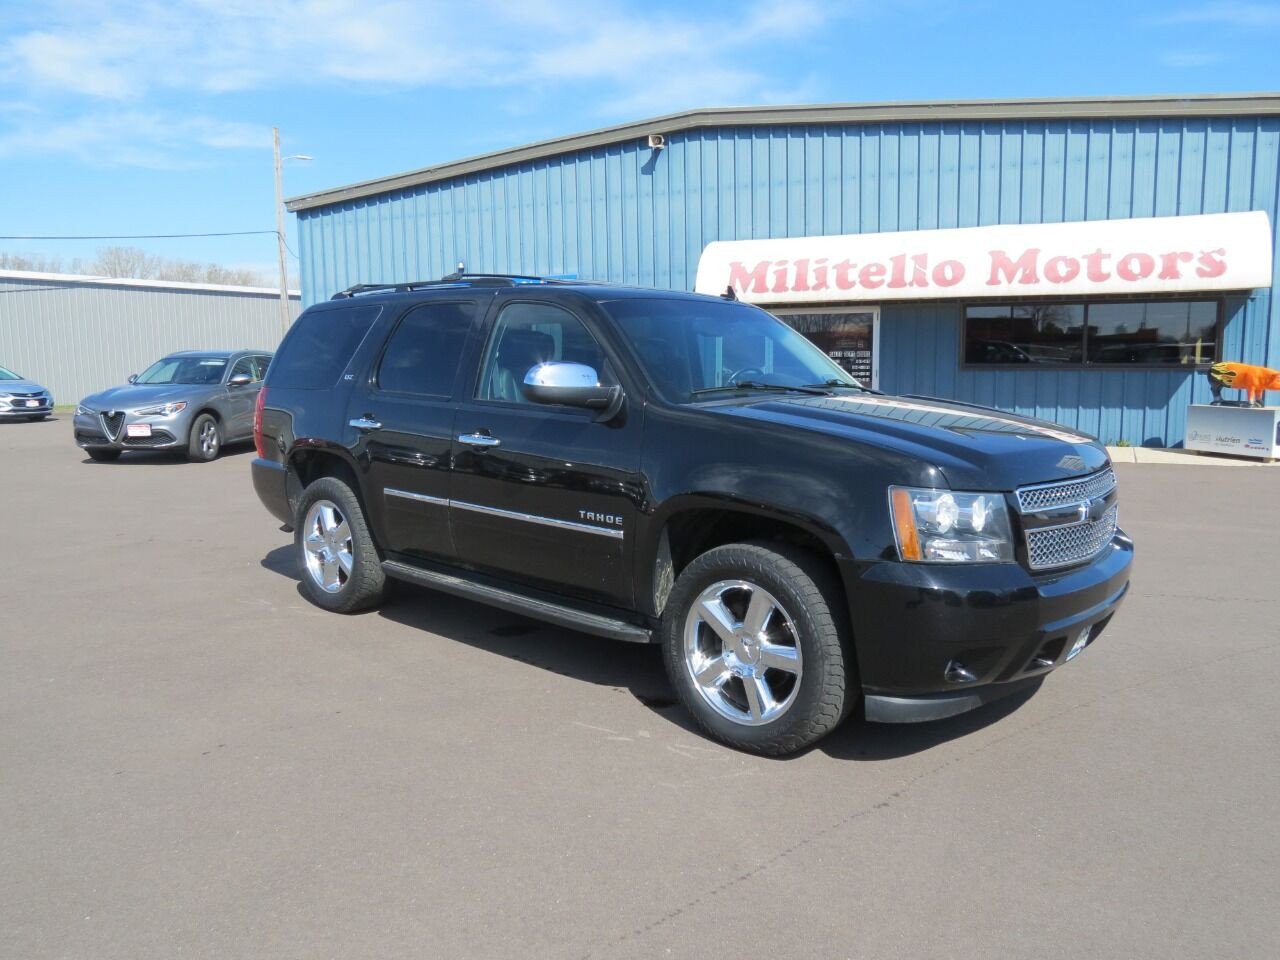 Used 2012 Chevrolet Tahoe LTZ with VIN 1GNSKCE06CR263145 for sale in Fairmont, Minnesota